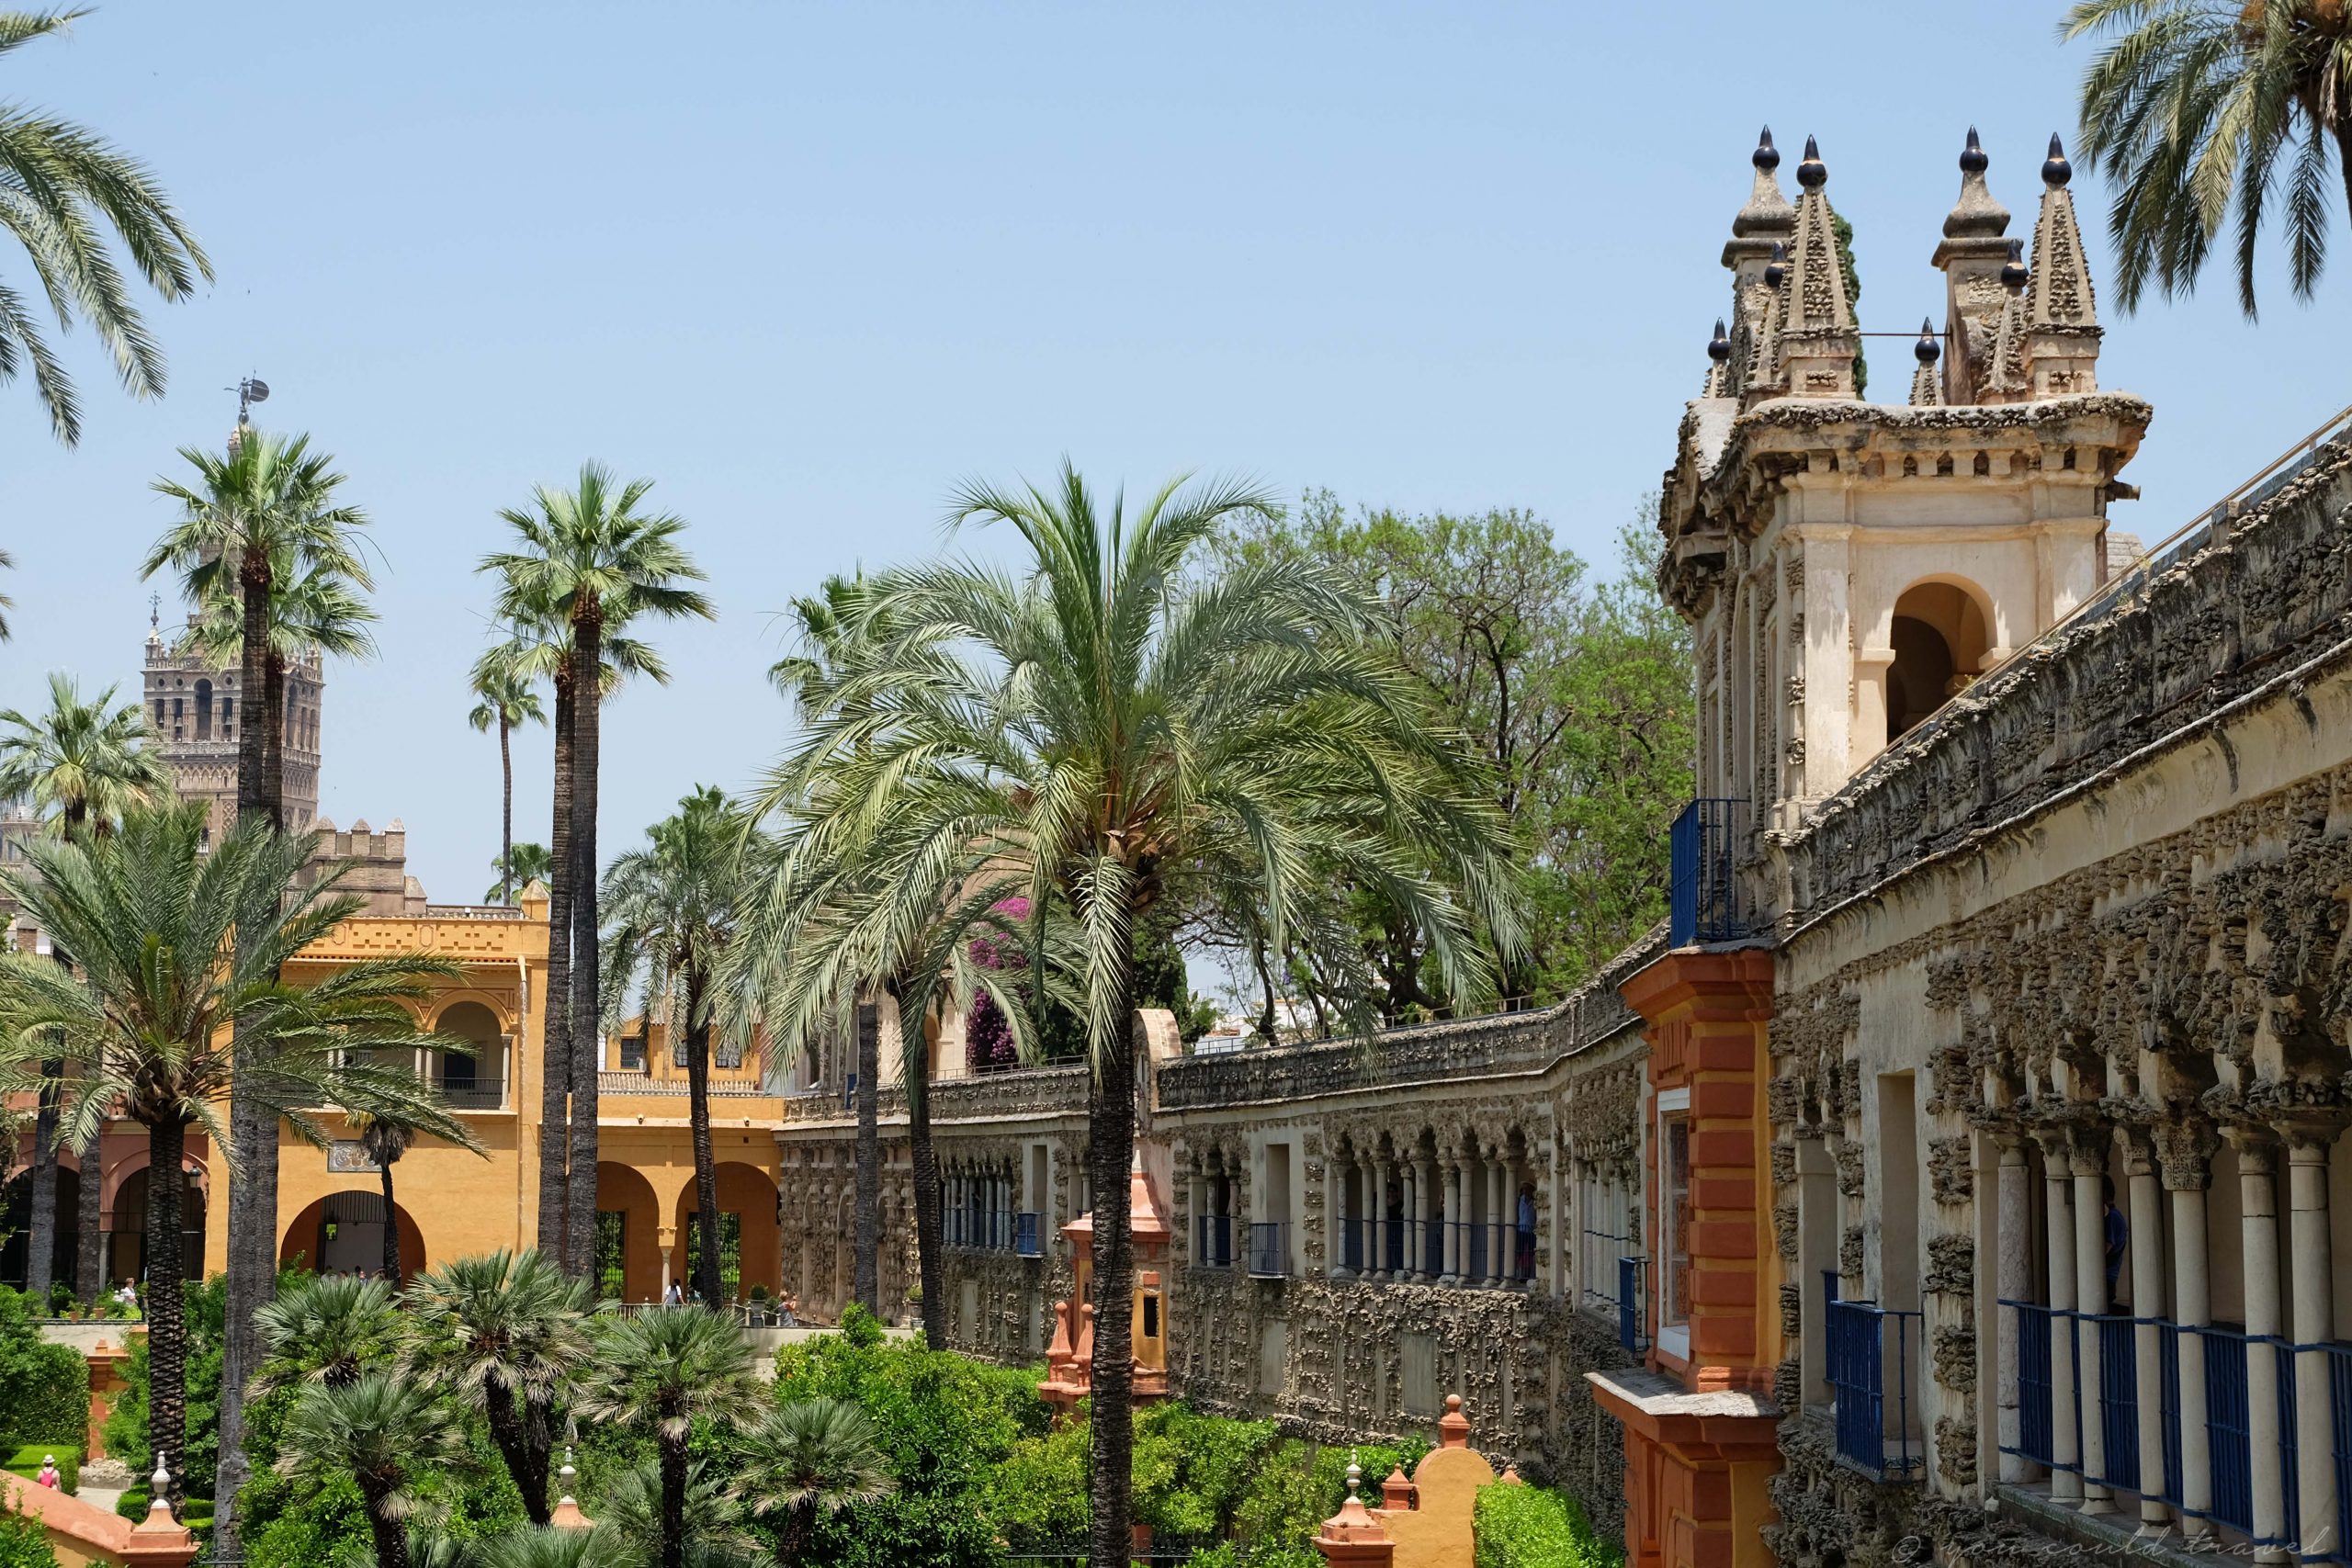 Palm trees and beautiful plants in the Alcazar of Seville